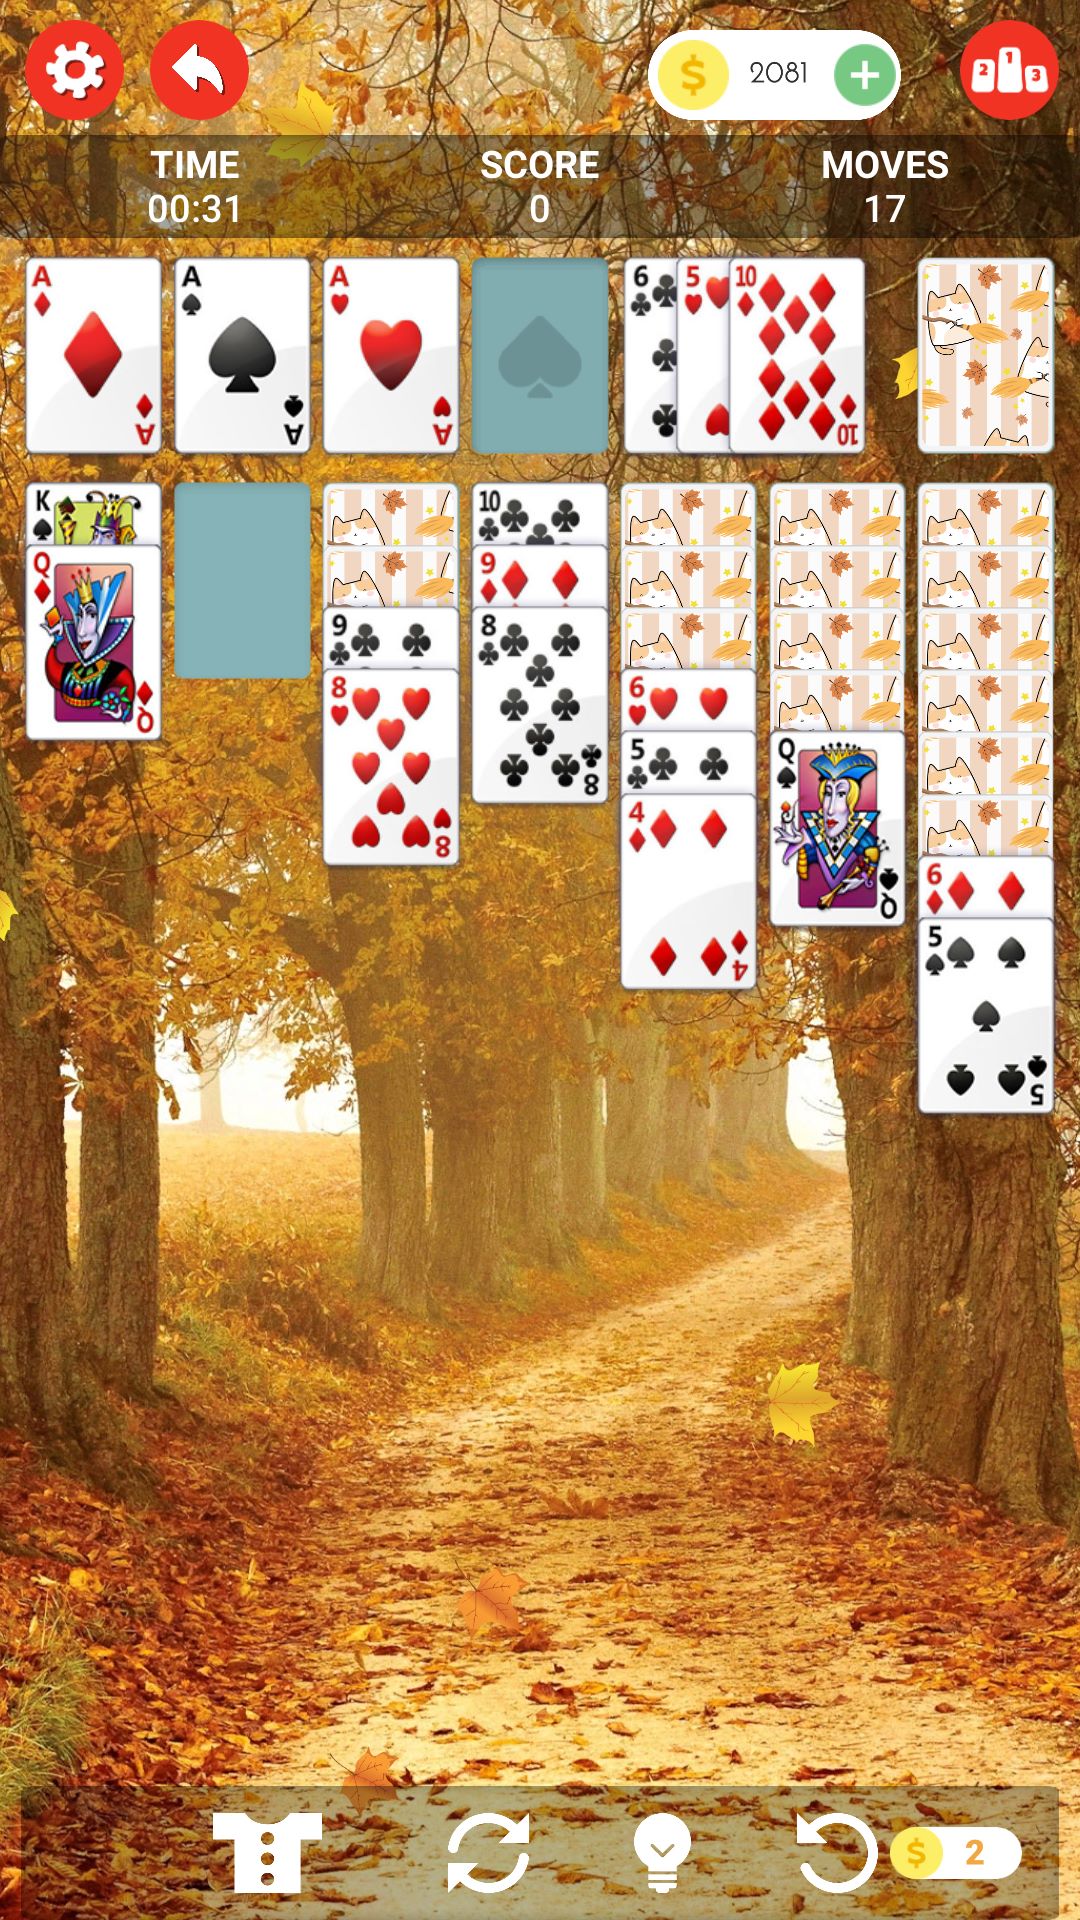 Solitaire Game Classic For Kindle Fire Tablet Easy Play Free Spider  Solitaire Card Game HD Playing Popular Free Cards Games for adults pyramid  Magic Freecell Christmas Solve Puzzles Original  Klondike::Appstore for Android